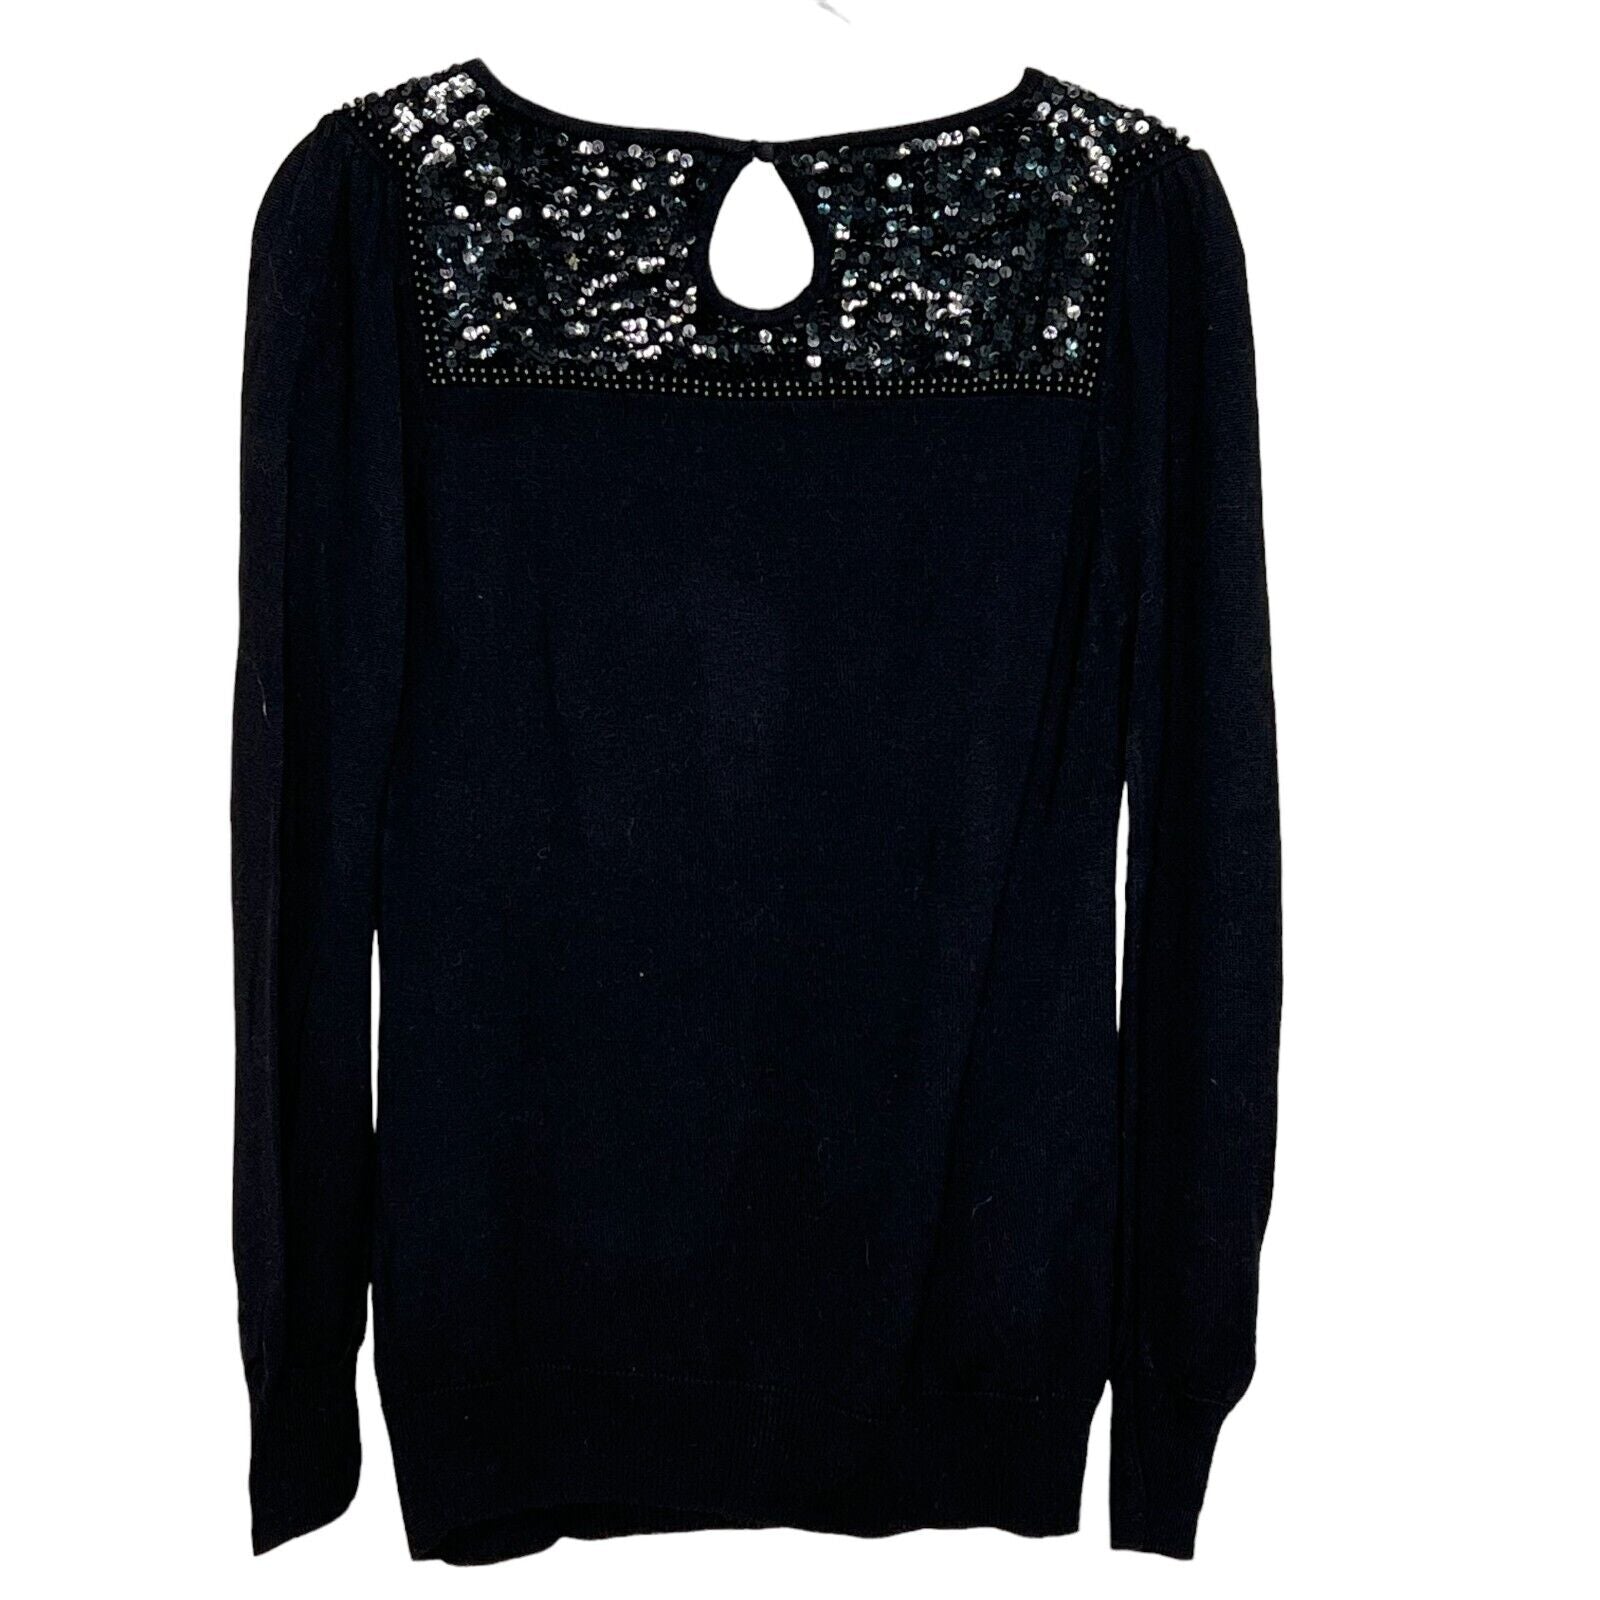 French Connection Black Beaded Sequin Sweater Size Medium